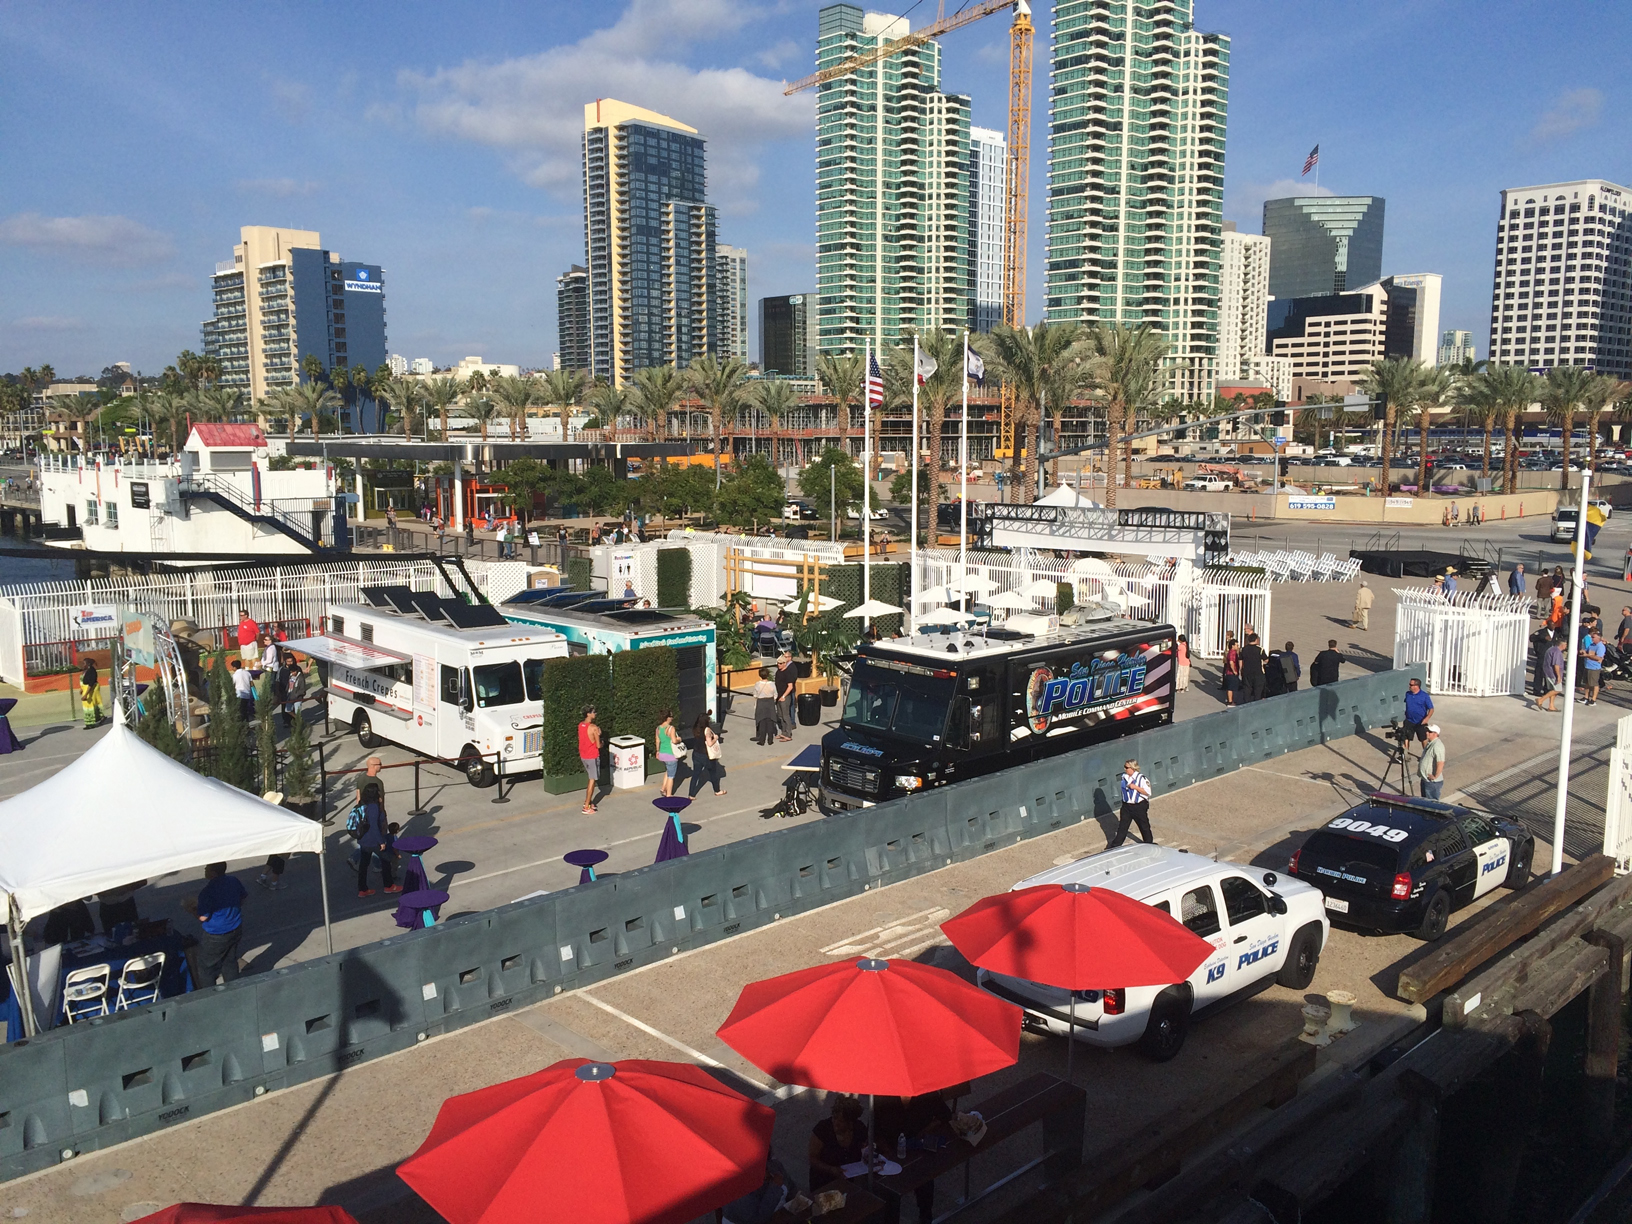 Food trucks and street performers were part of the festivities on hand at the public ribbon-cutting for San Diego’s new North Embarcadero Waterfront Park.